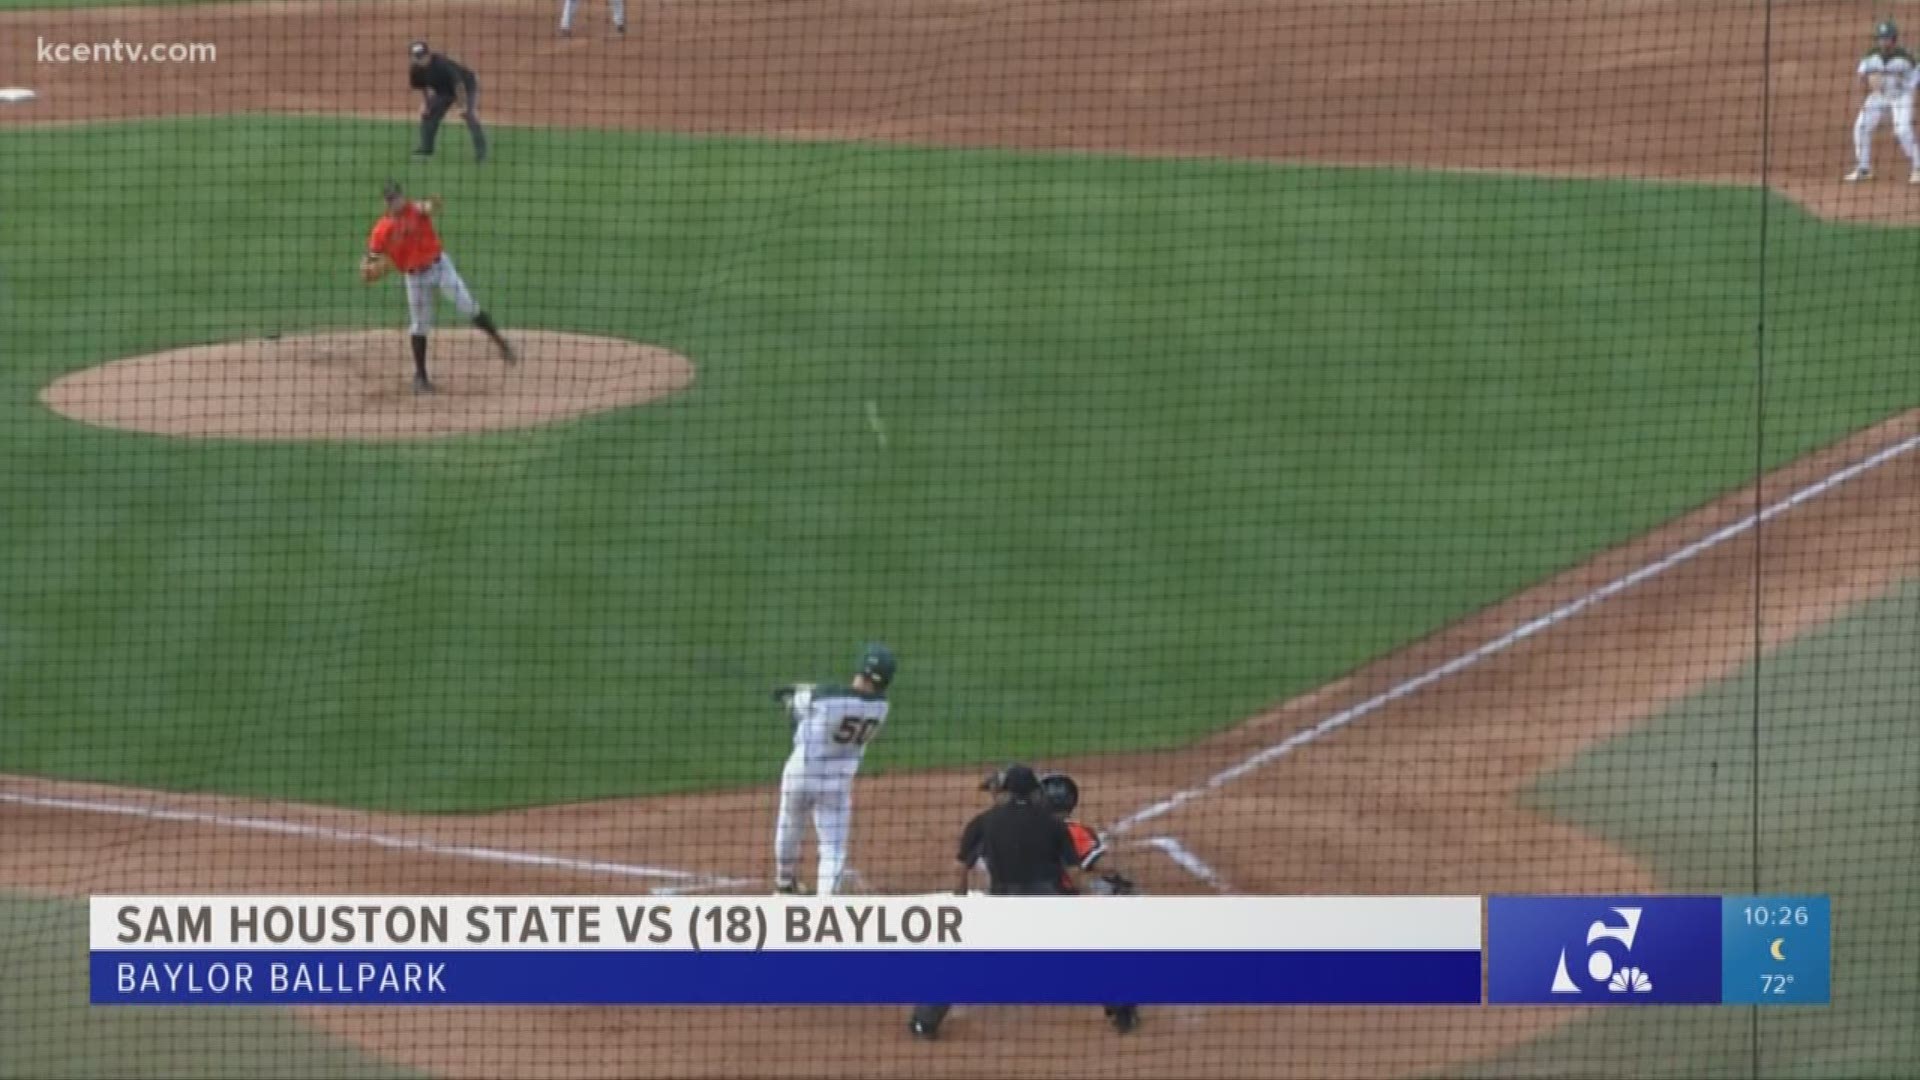 Baylor is on top of the Big 12 with an 8-3 record, but Tuesday they slid into a non-conference showdown. The Bears defeated Sam Houston State 9-6.